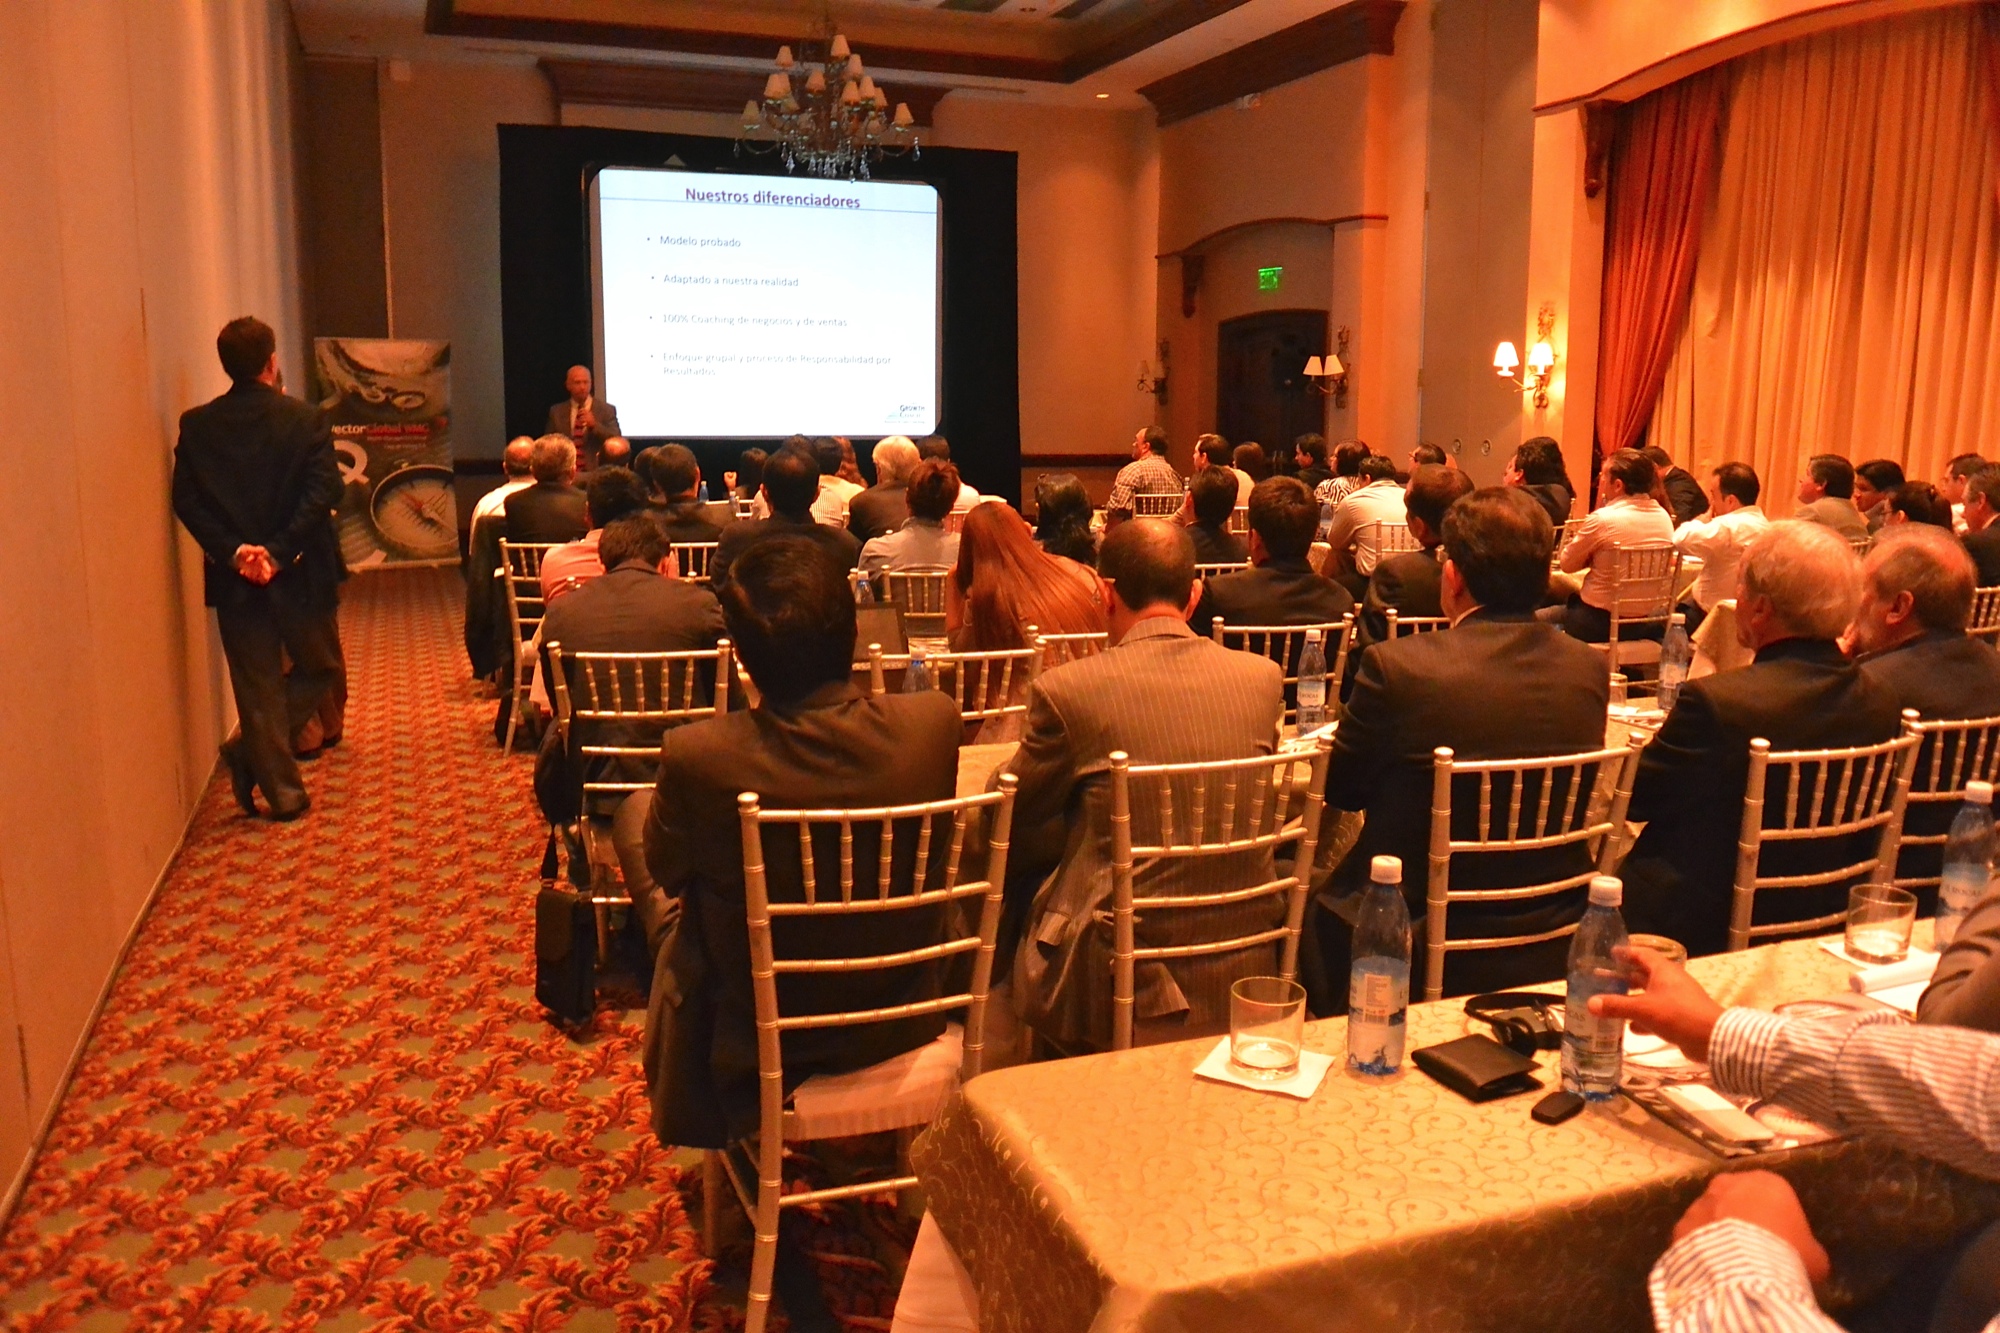 The Growth Coach was in Ecuador talking to business leaders about The Growth Coach system.